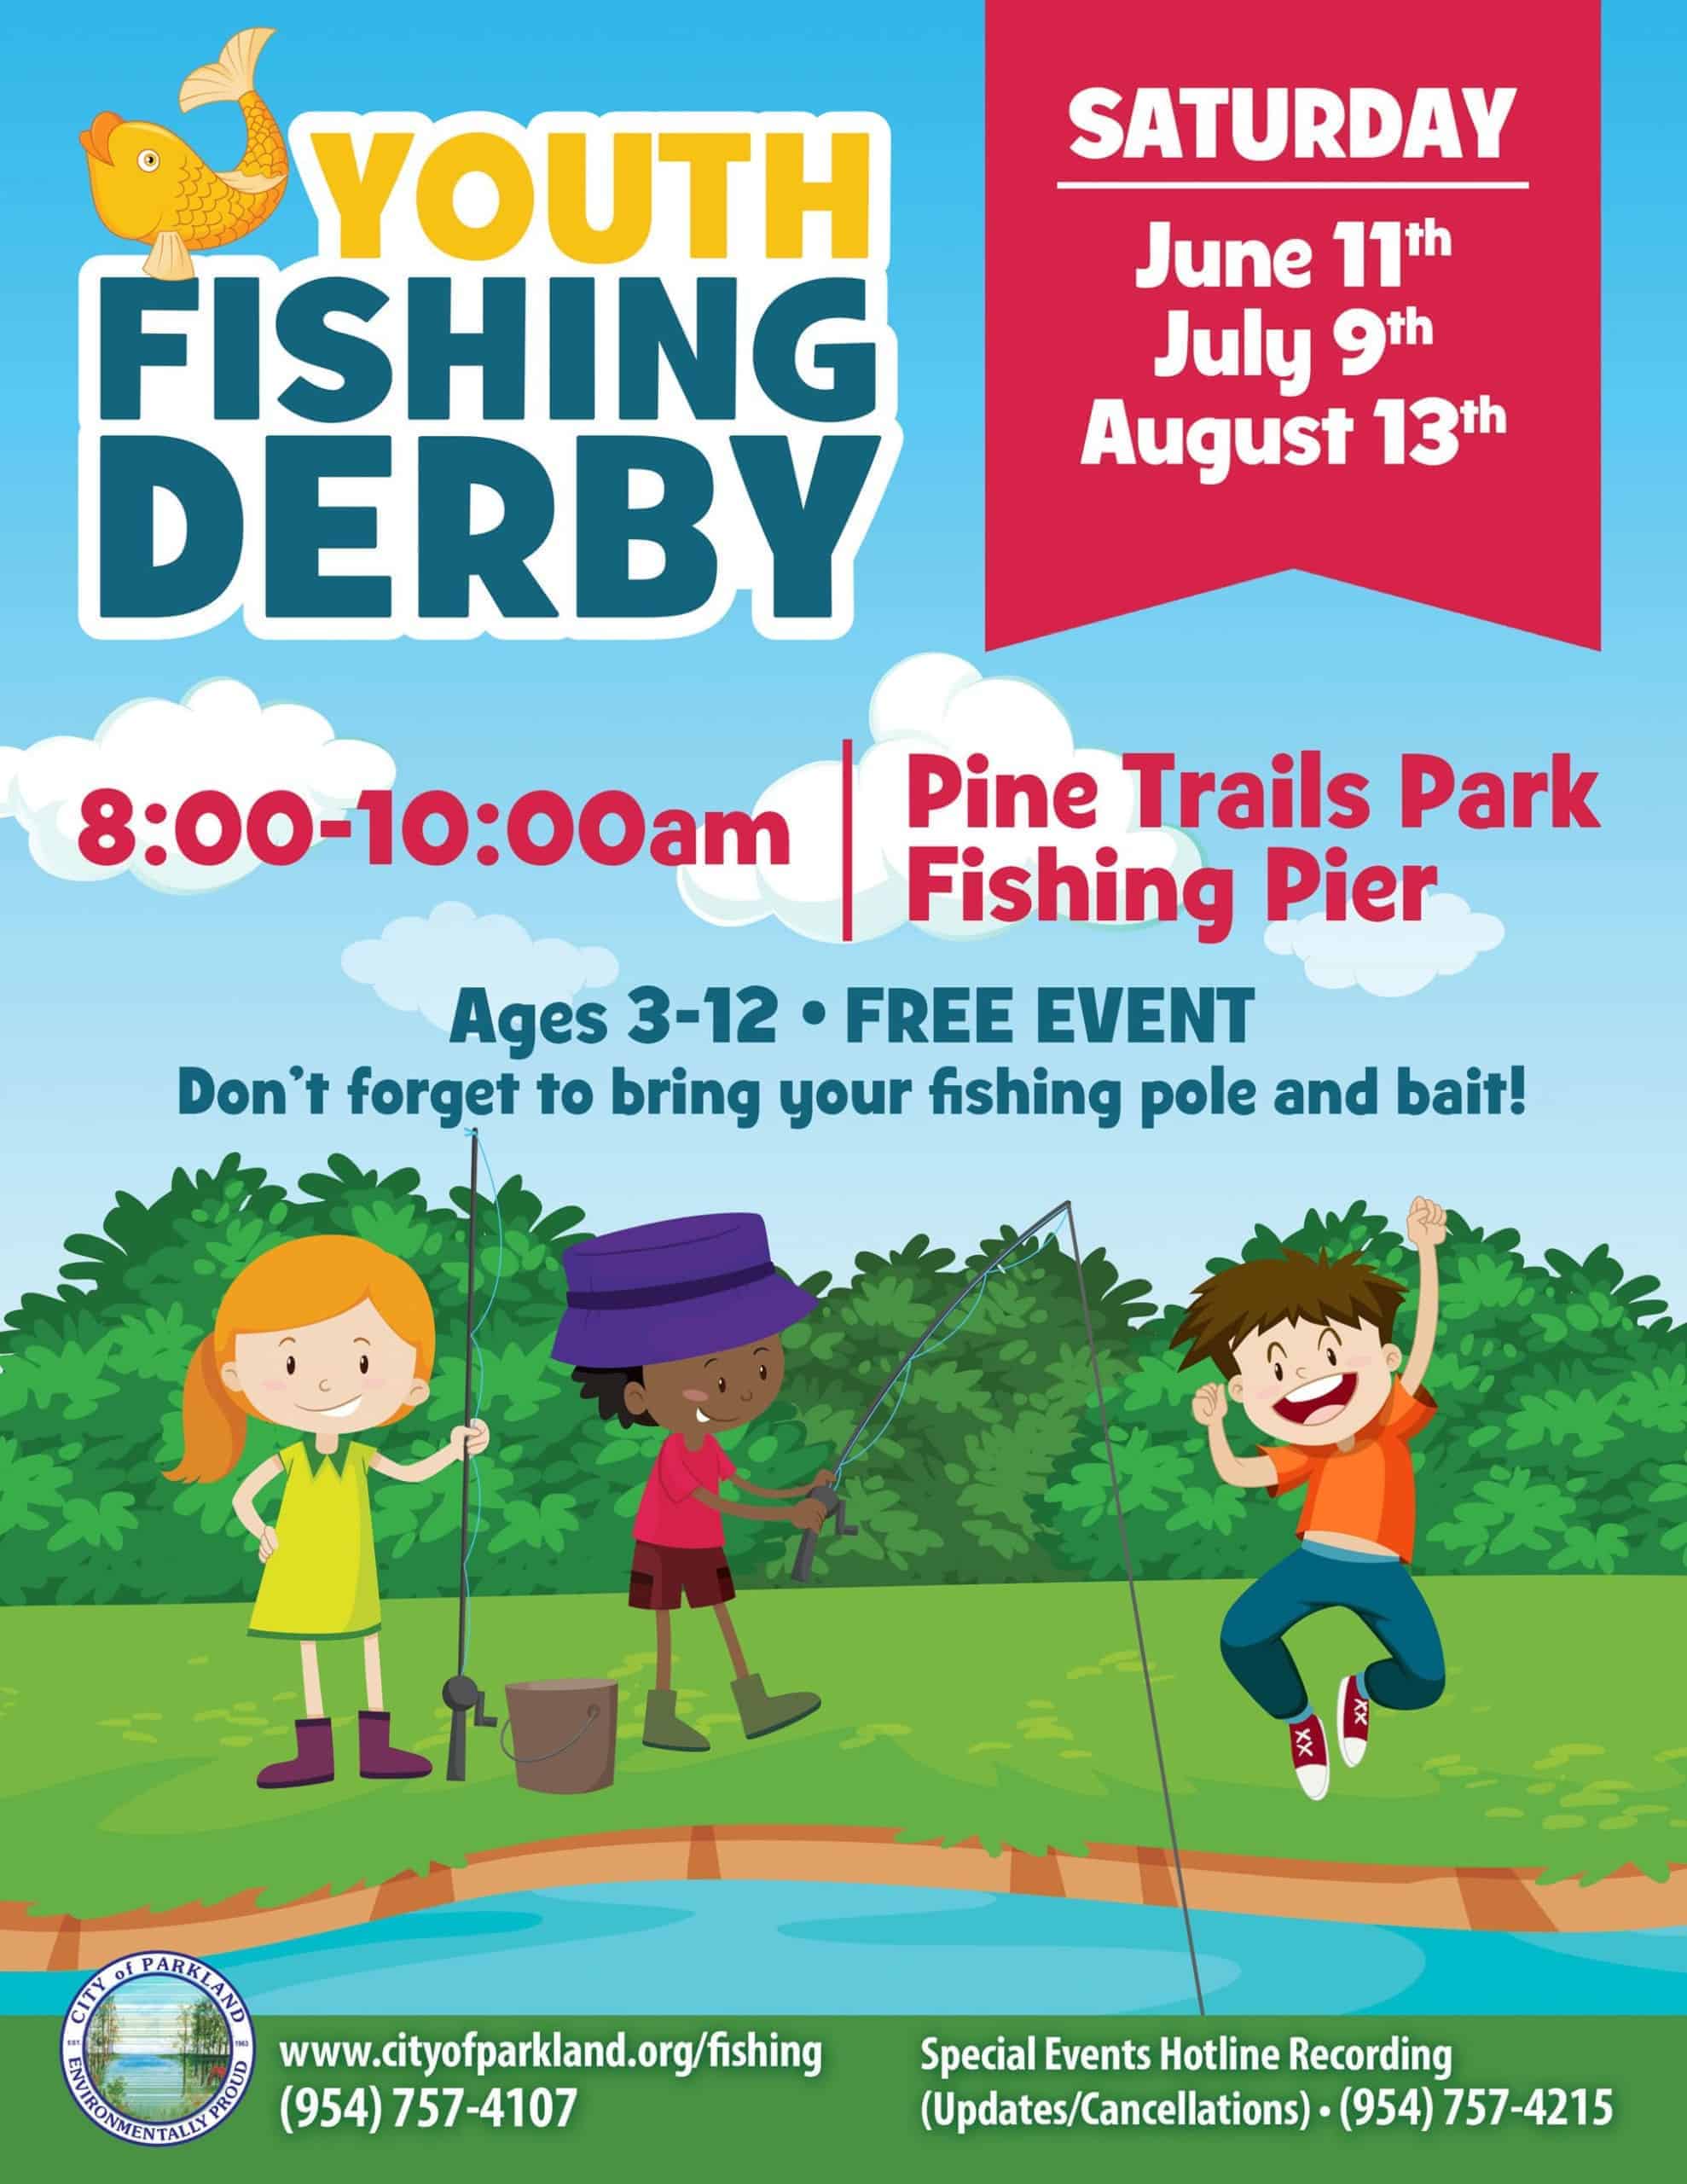 City of Parkland - Youth Fishing Derby - 2022